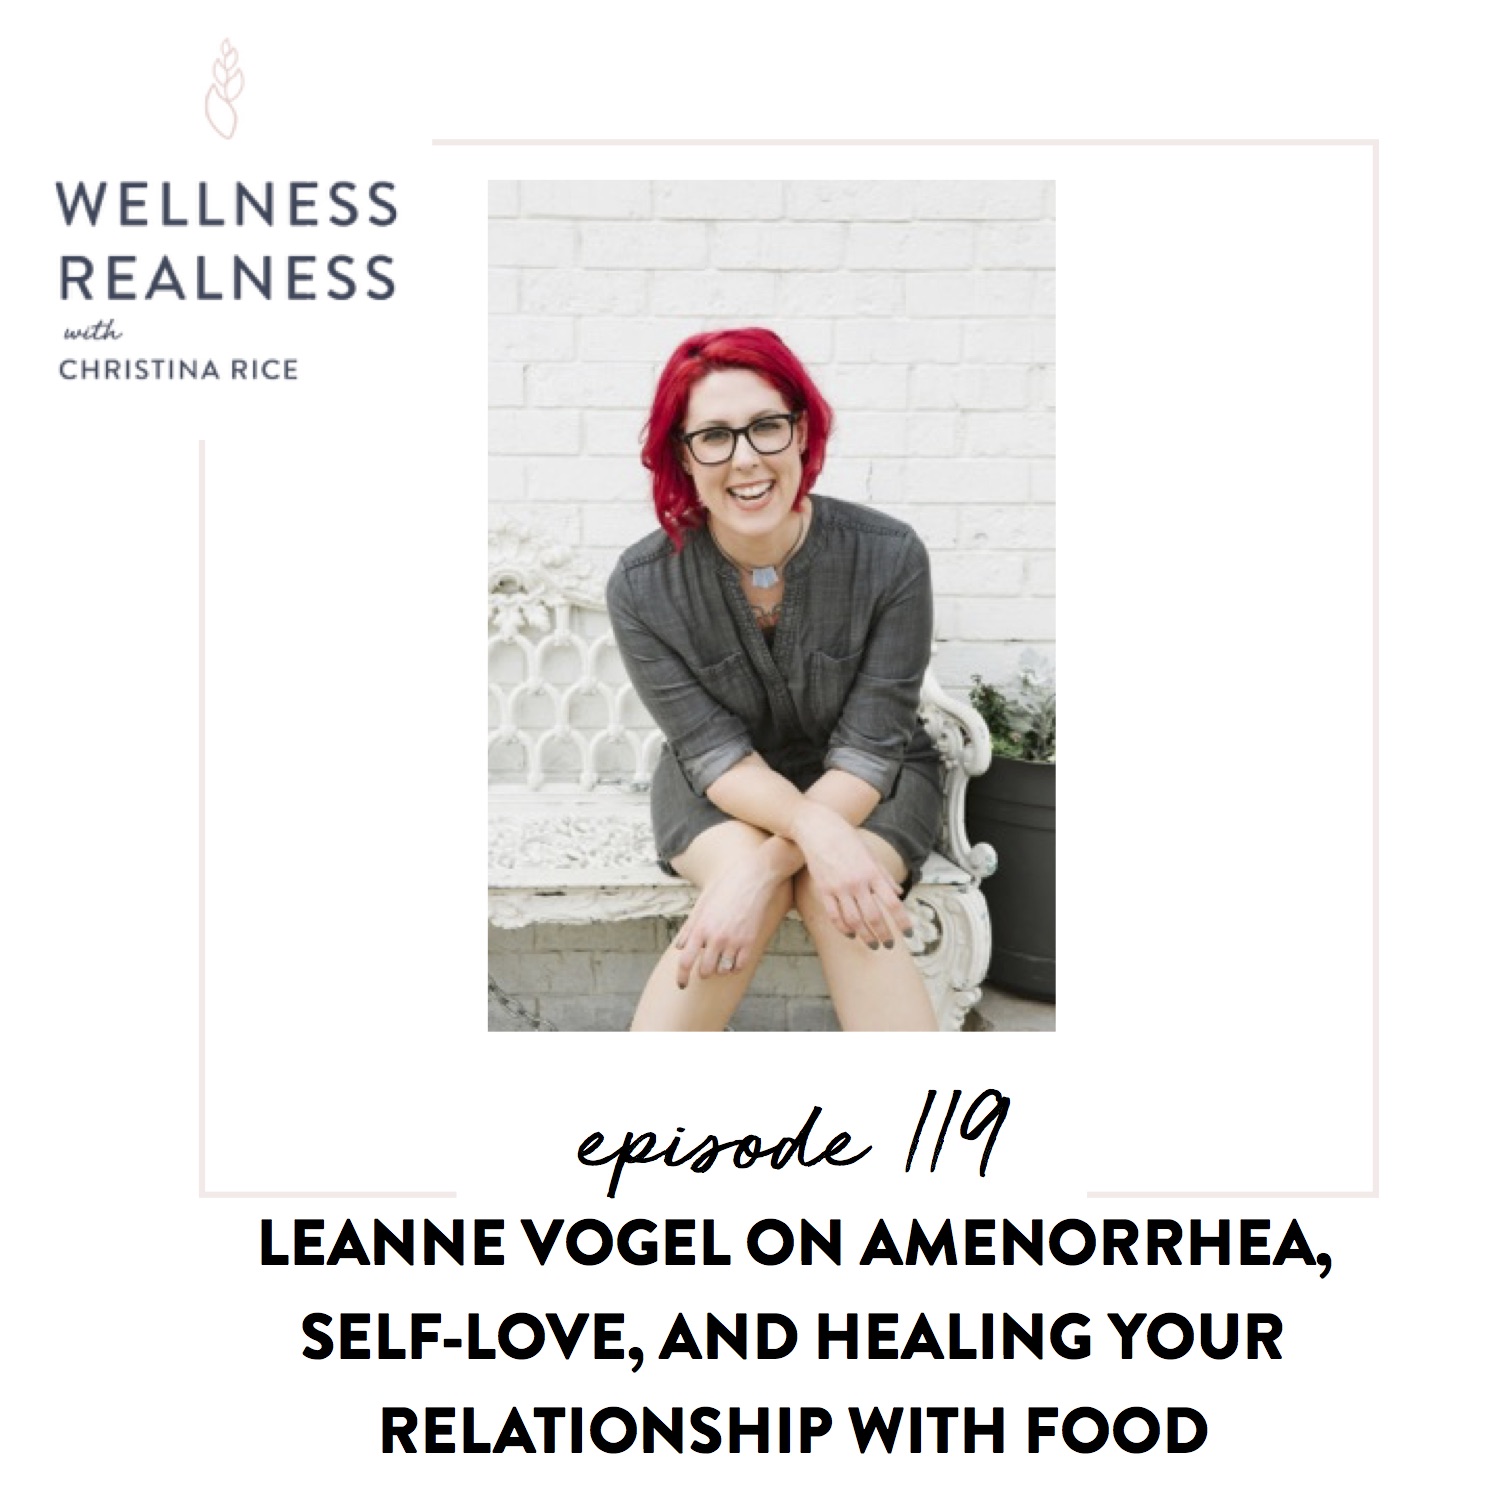 119: Leanne Vogel on Amenorrhea, Self-Love, and Healing Your Relationship with Food